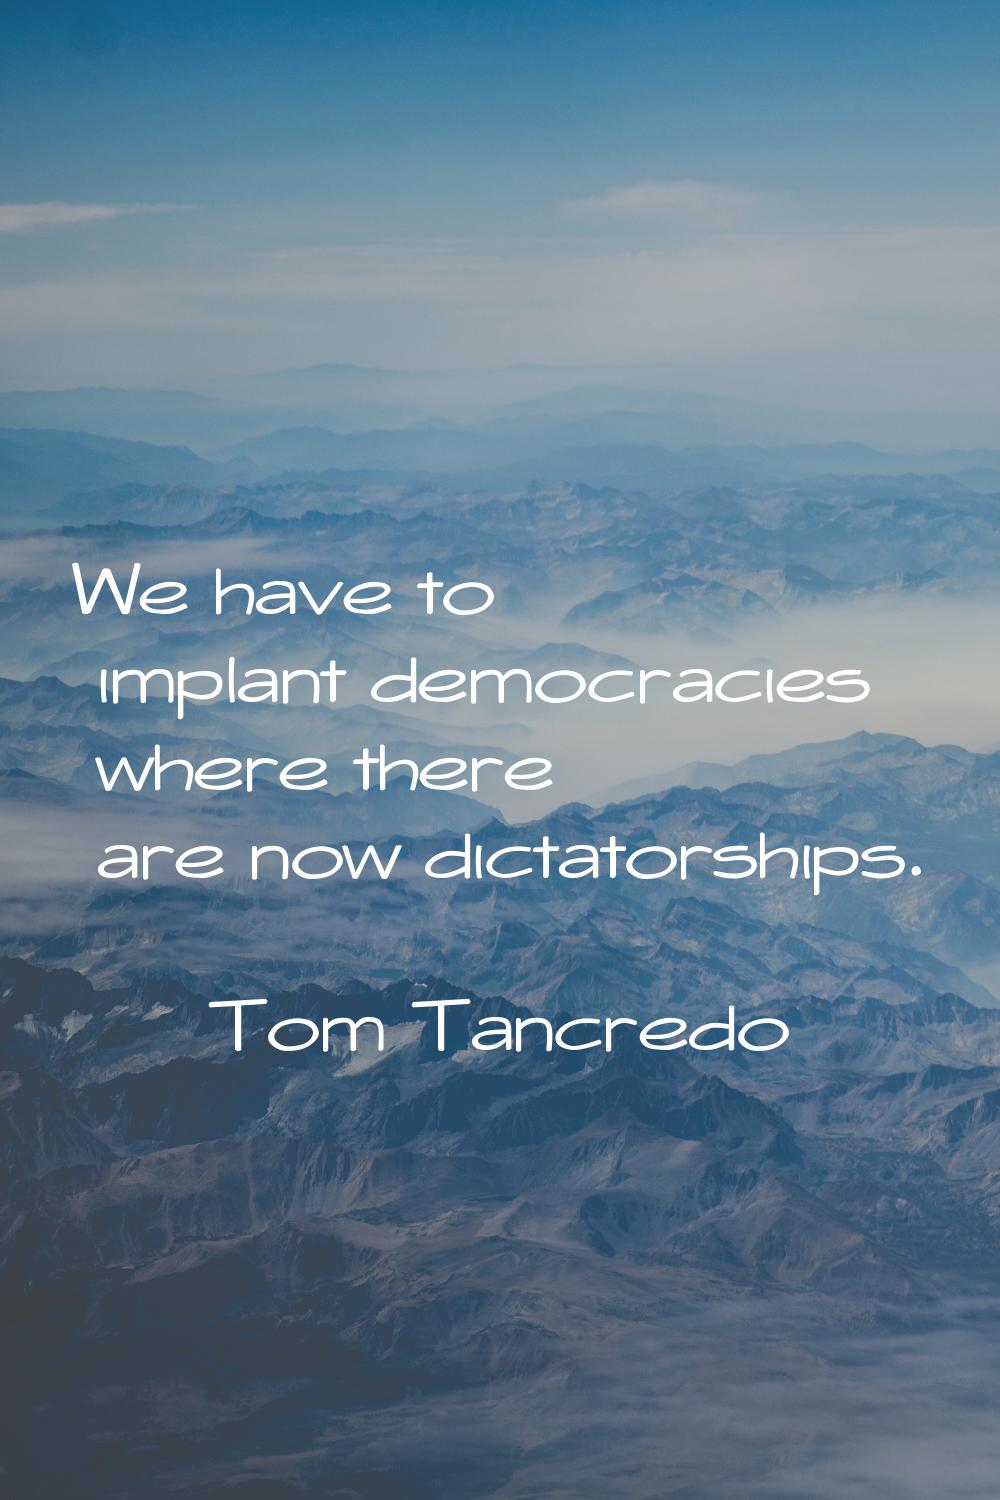 We have to implant democracies where there are now dictatorships.